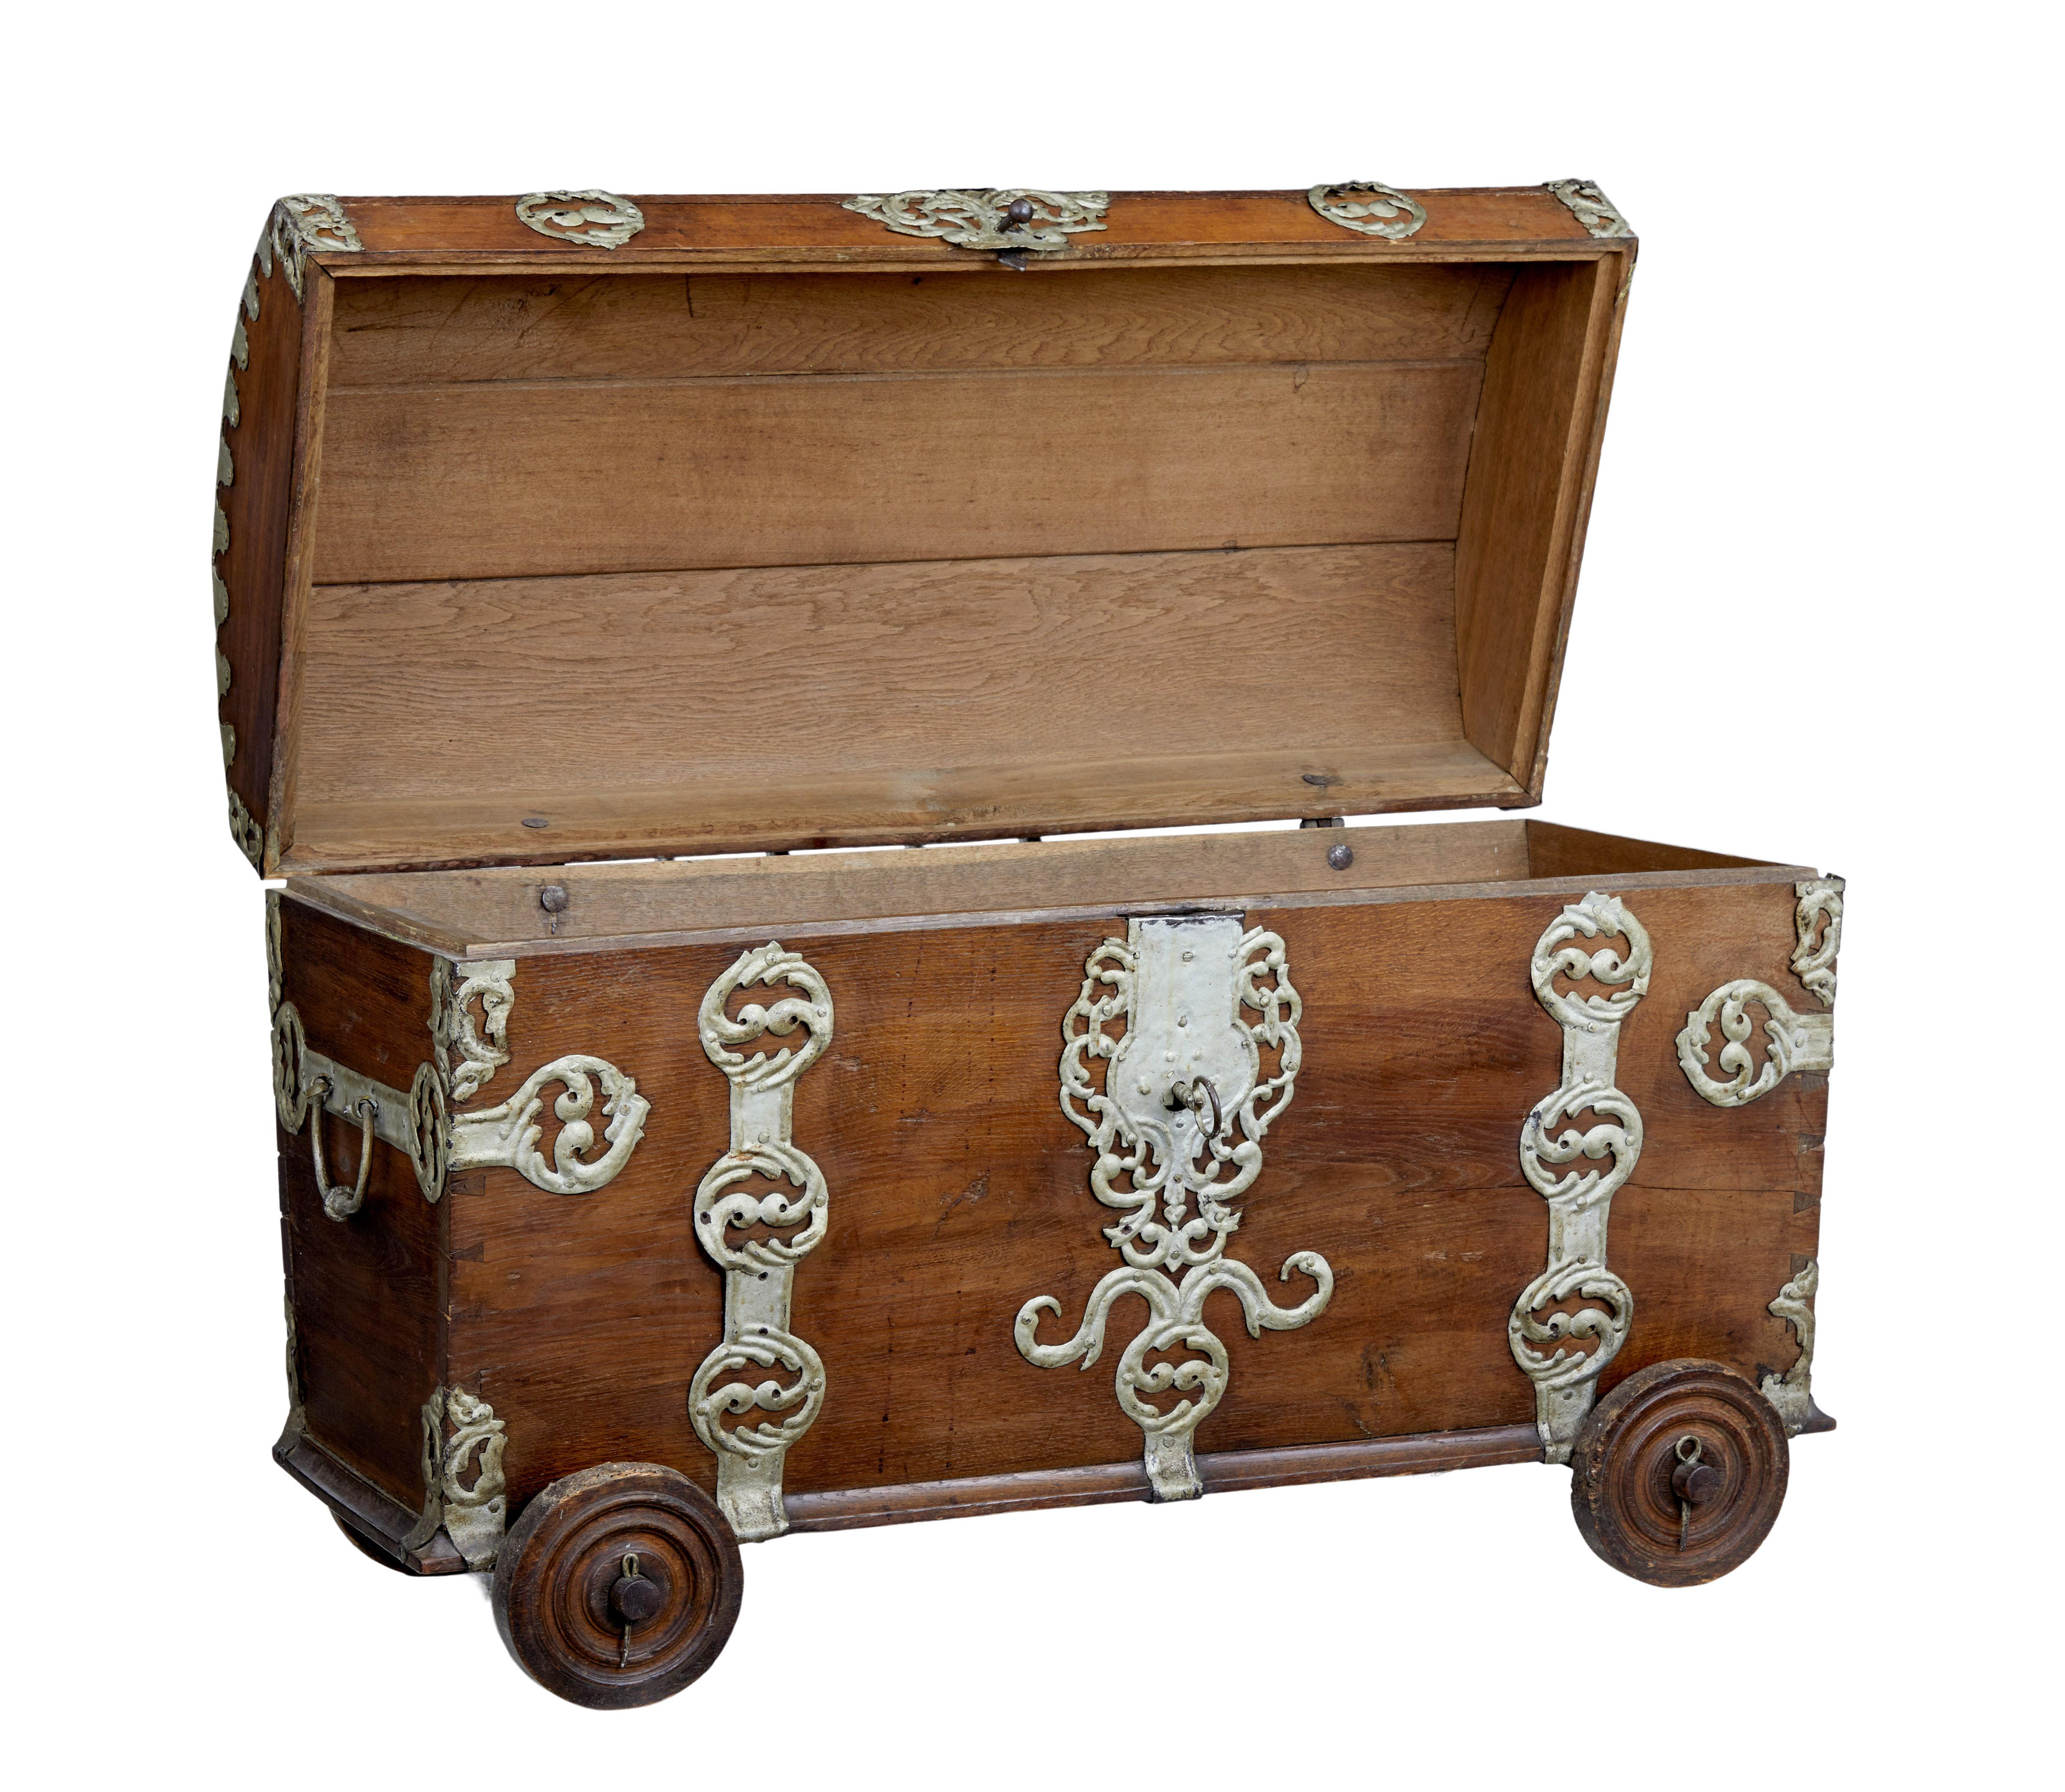 Beautiful and rare oak dome top trunk, circa 1780.

Decorative piece made from character oak. Dome topped and embellished with ornate metal strap work, and original carrying handles to the sides.

Mounted on original wheels, held in place with